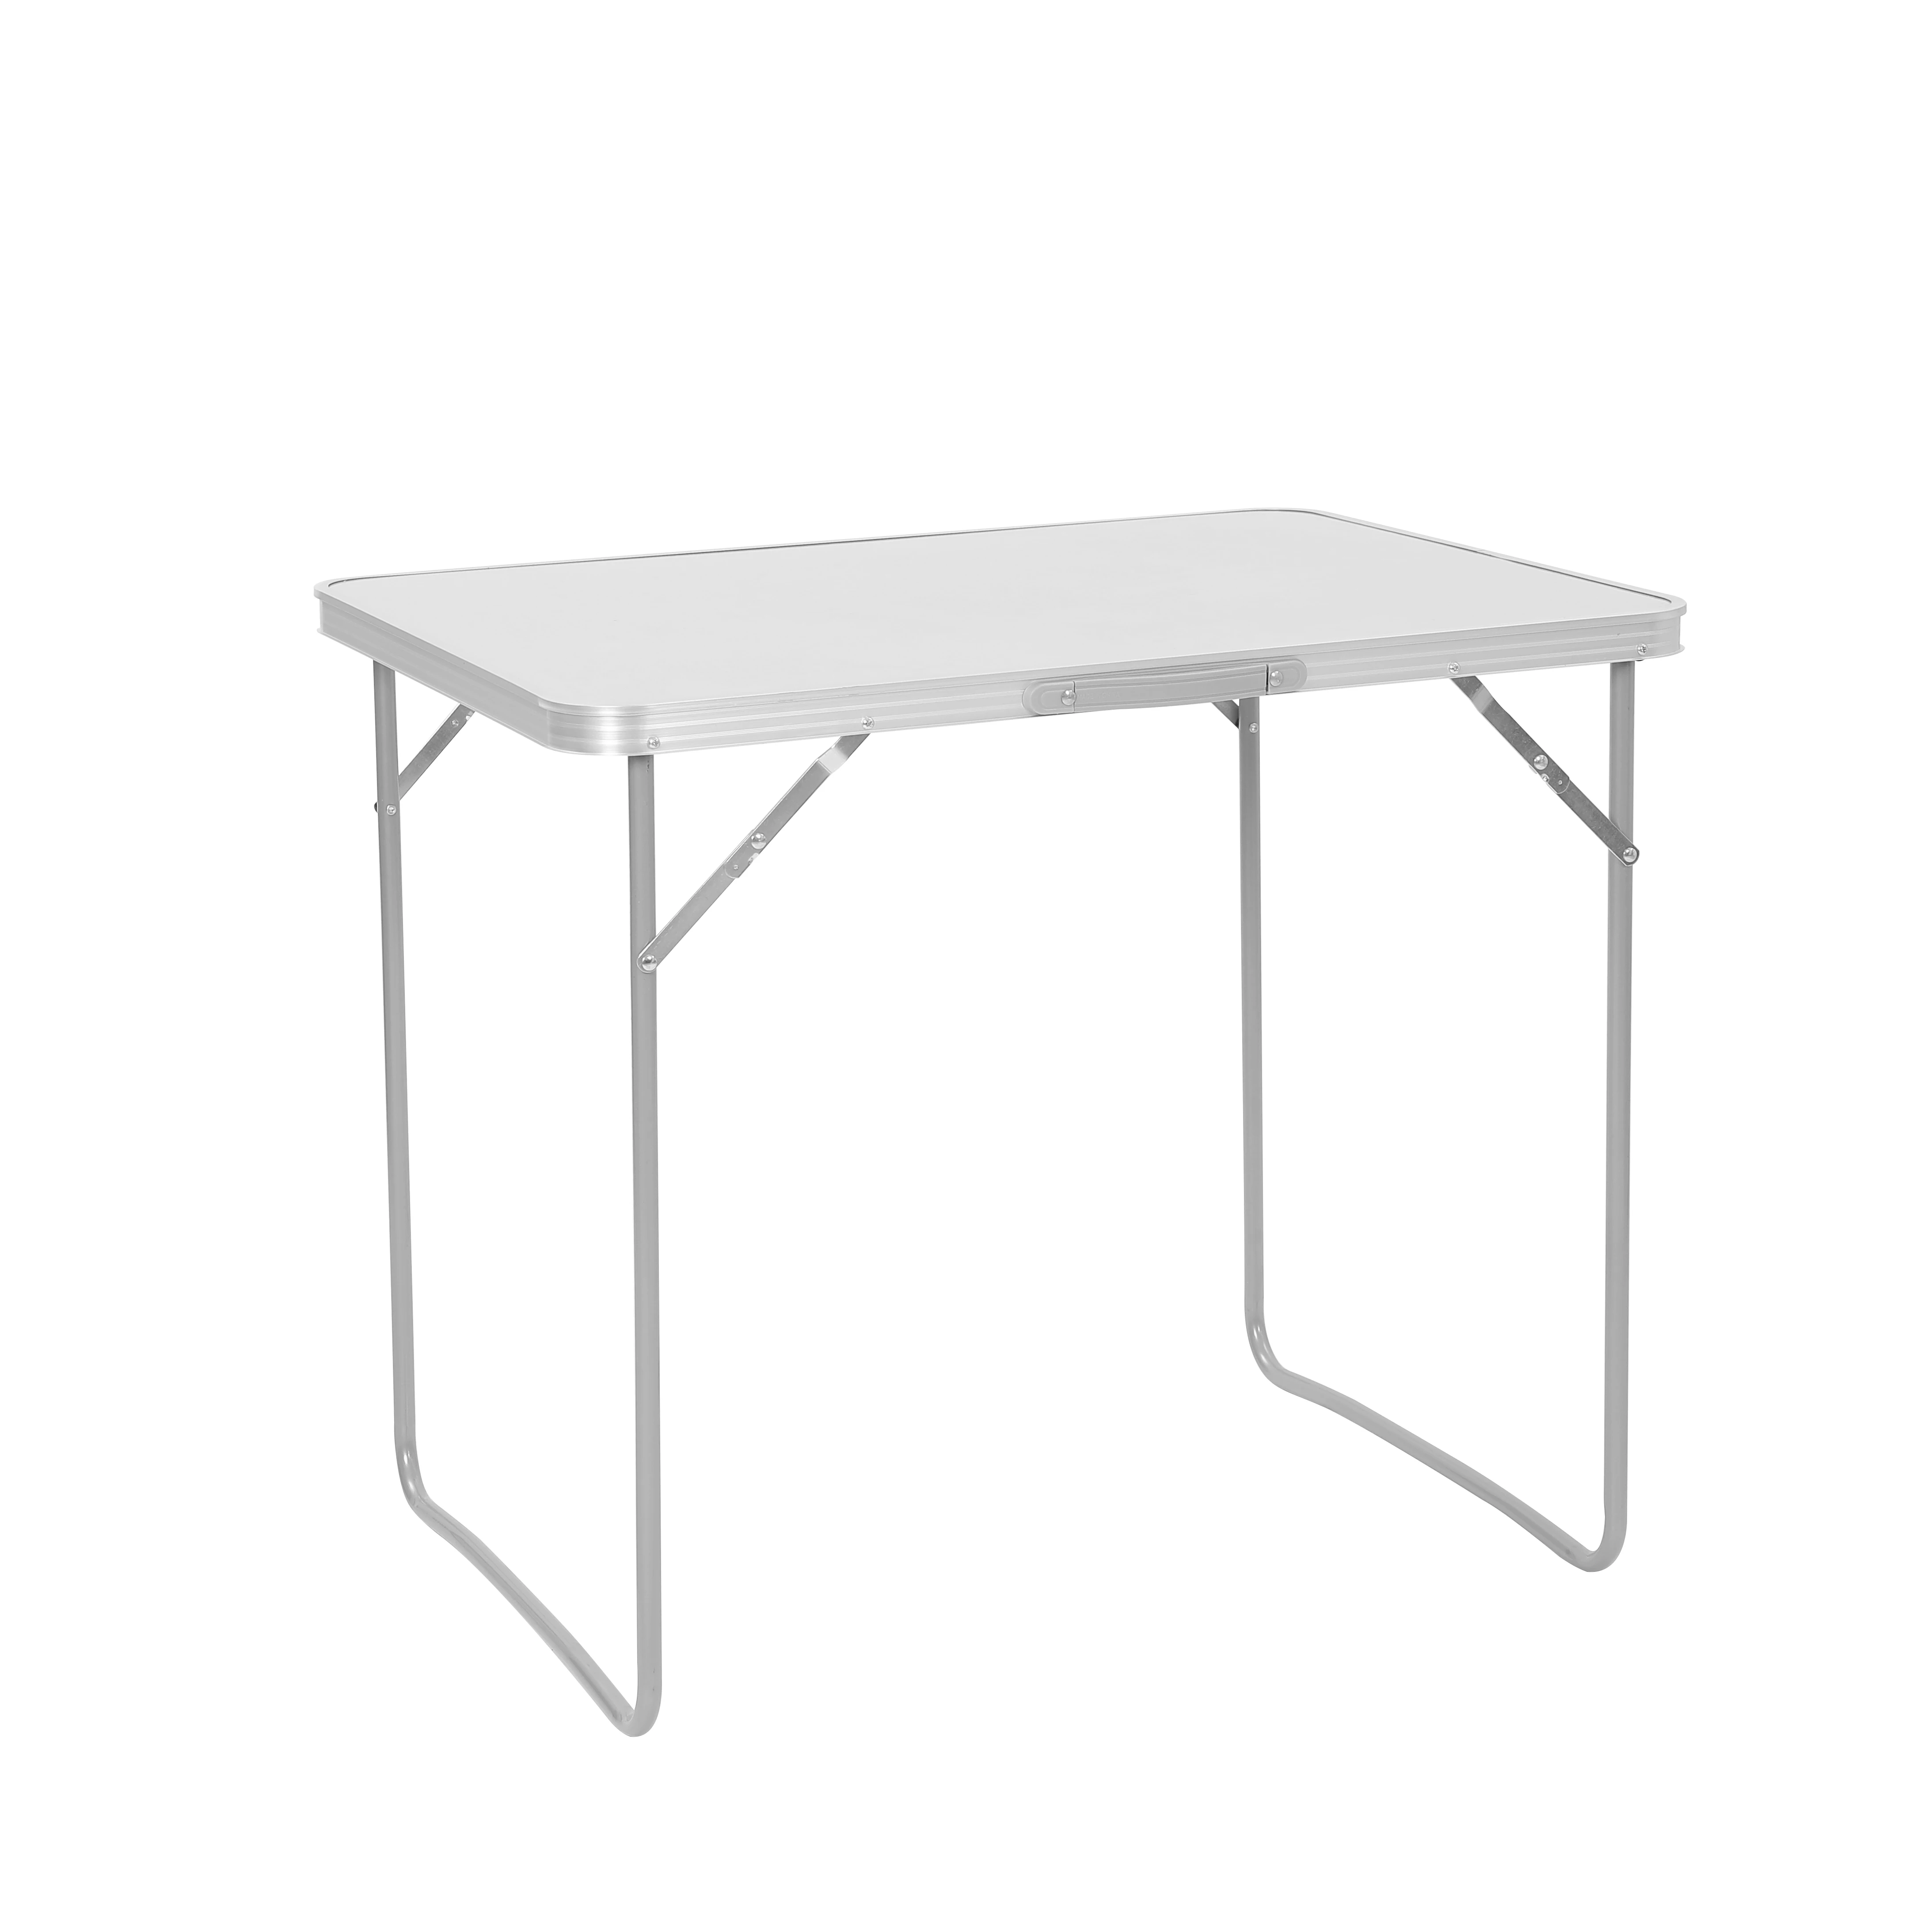 8060 Folding Camping Table Portable Adjustable Height Lightweight Aluminum Folding Table For Outdoor Picnic Cooking Buy Aluminum Folding Table